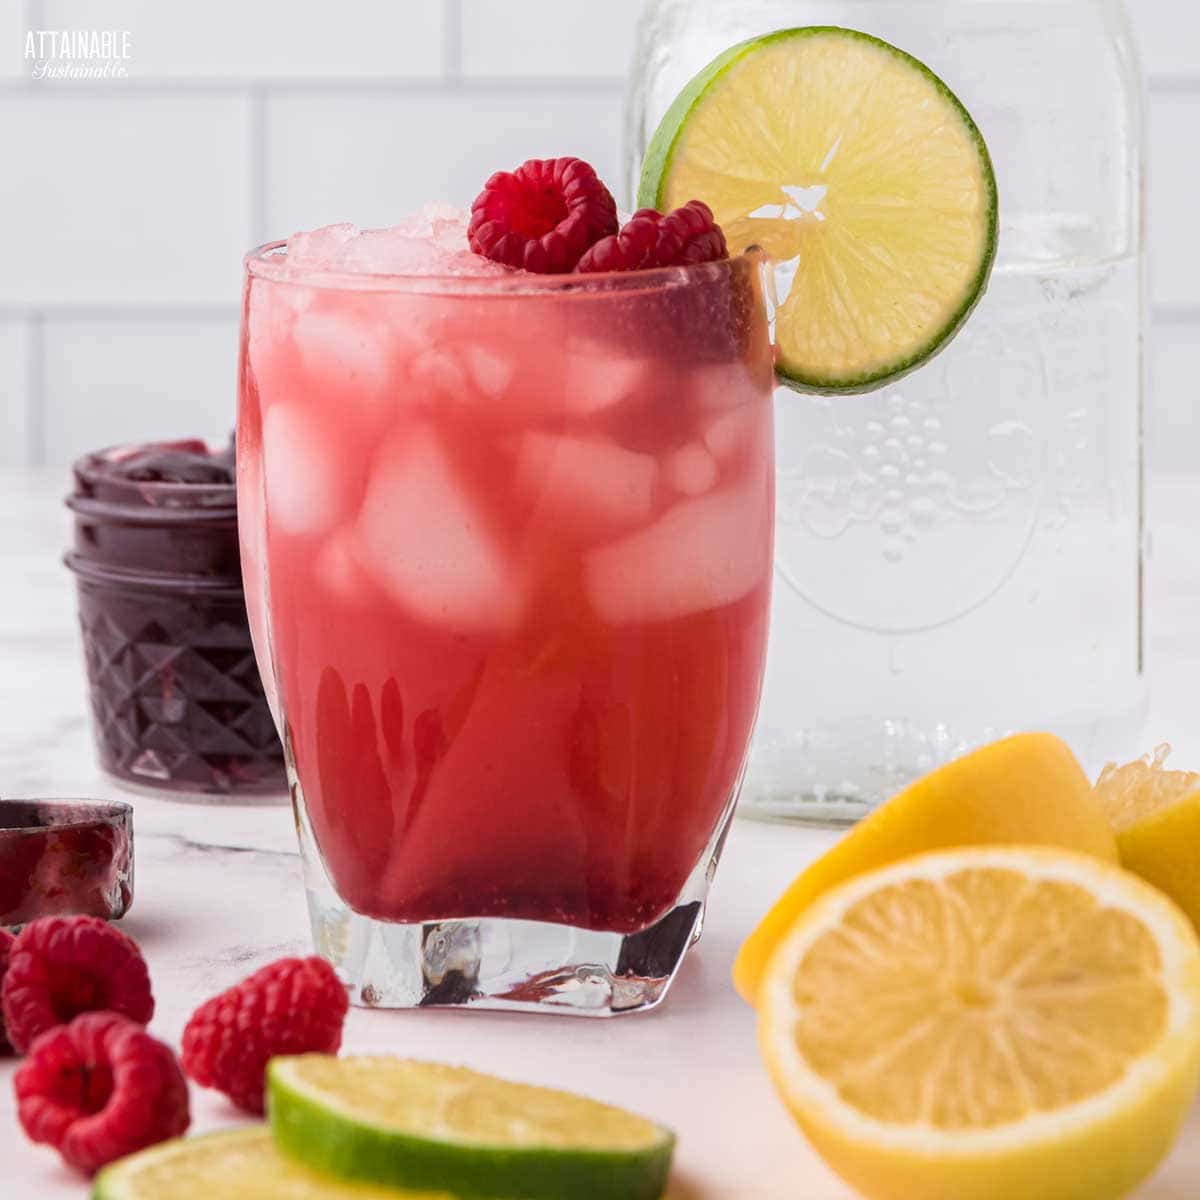 jam seltzer in a glass garnished with raspberries and limes.